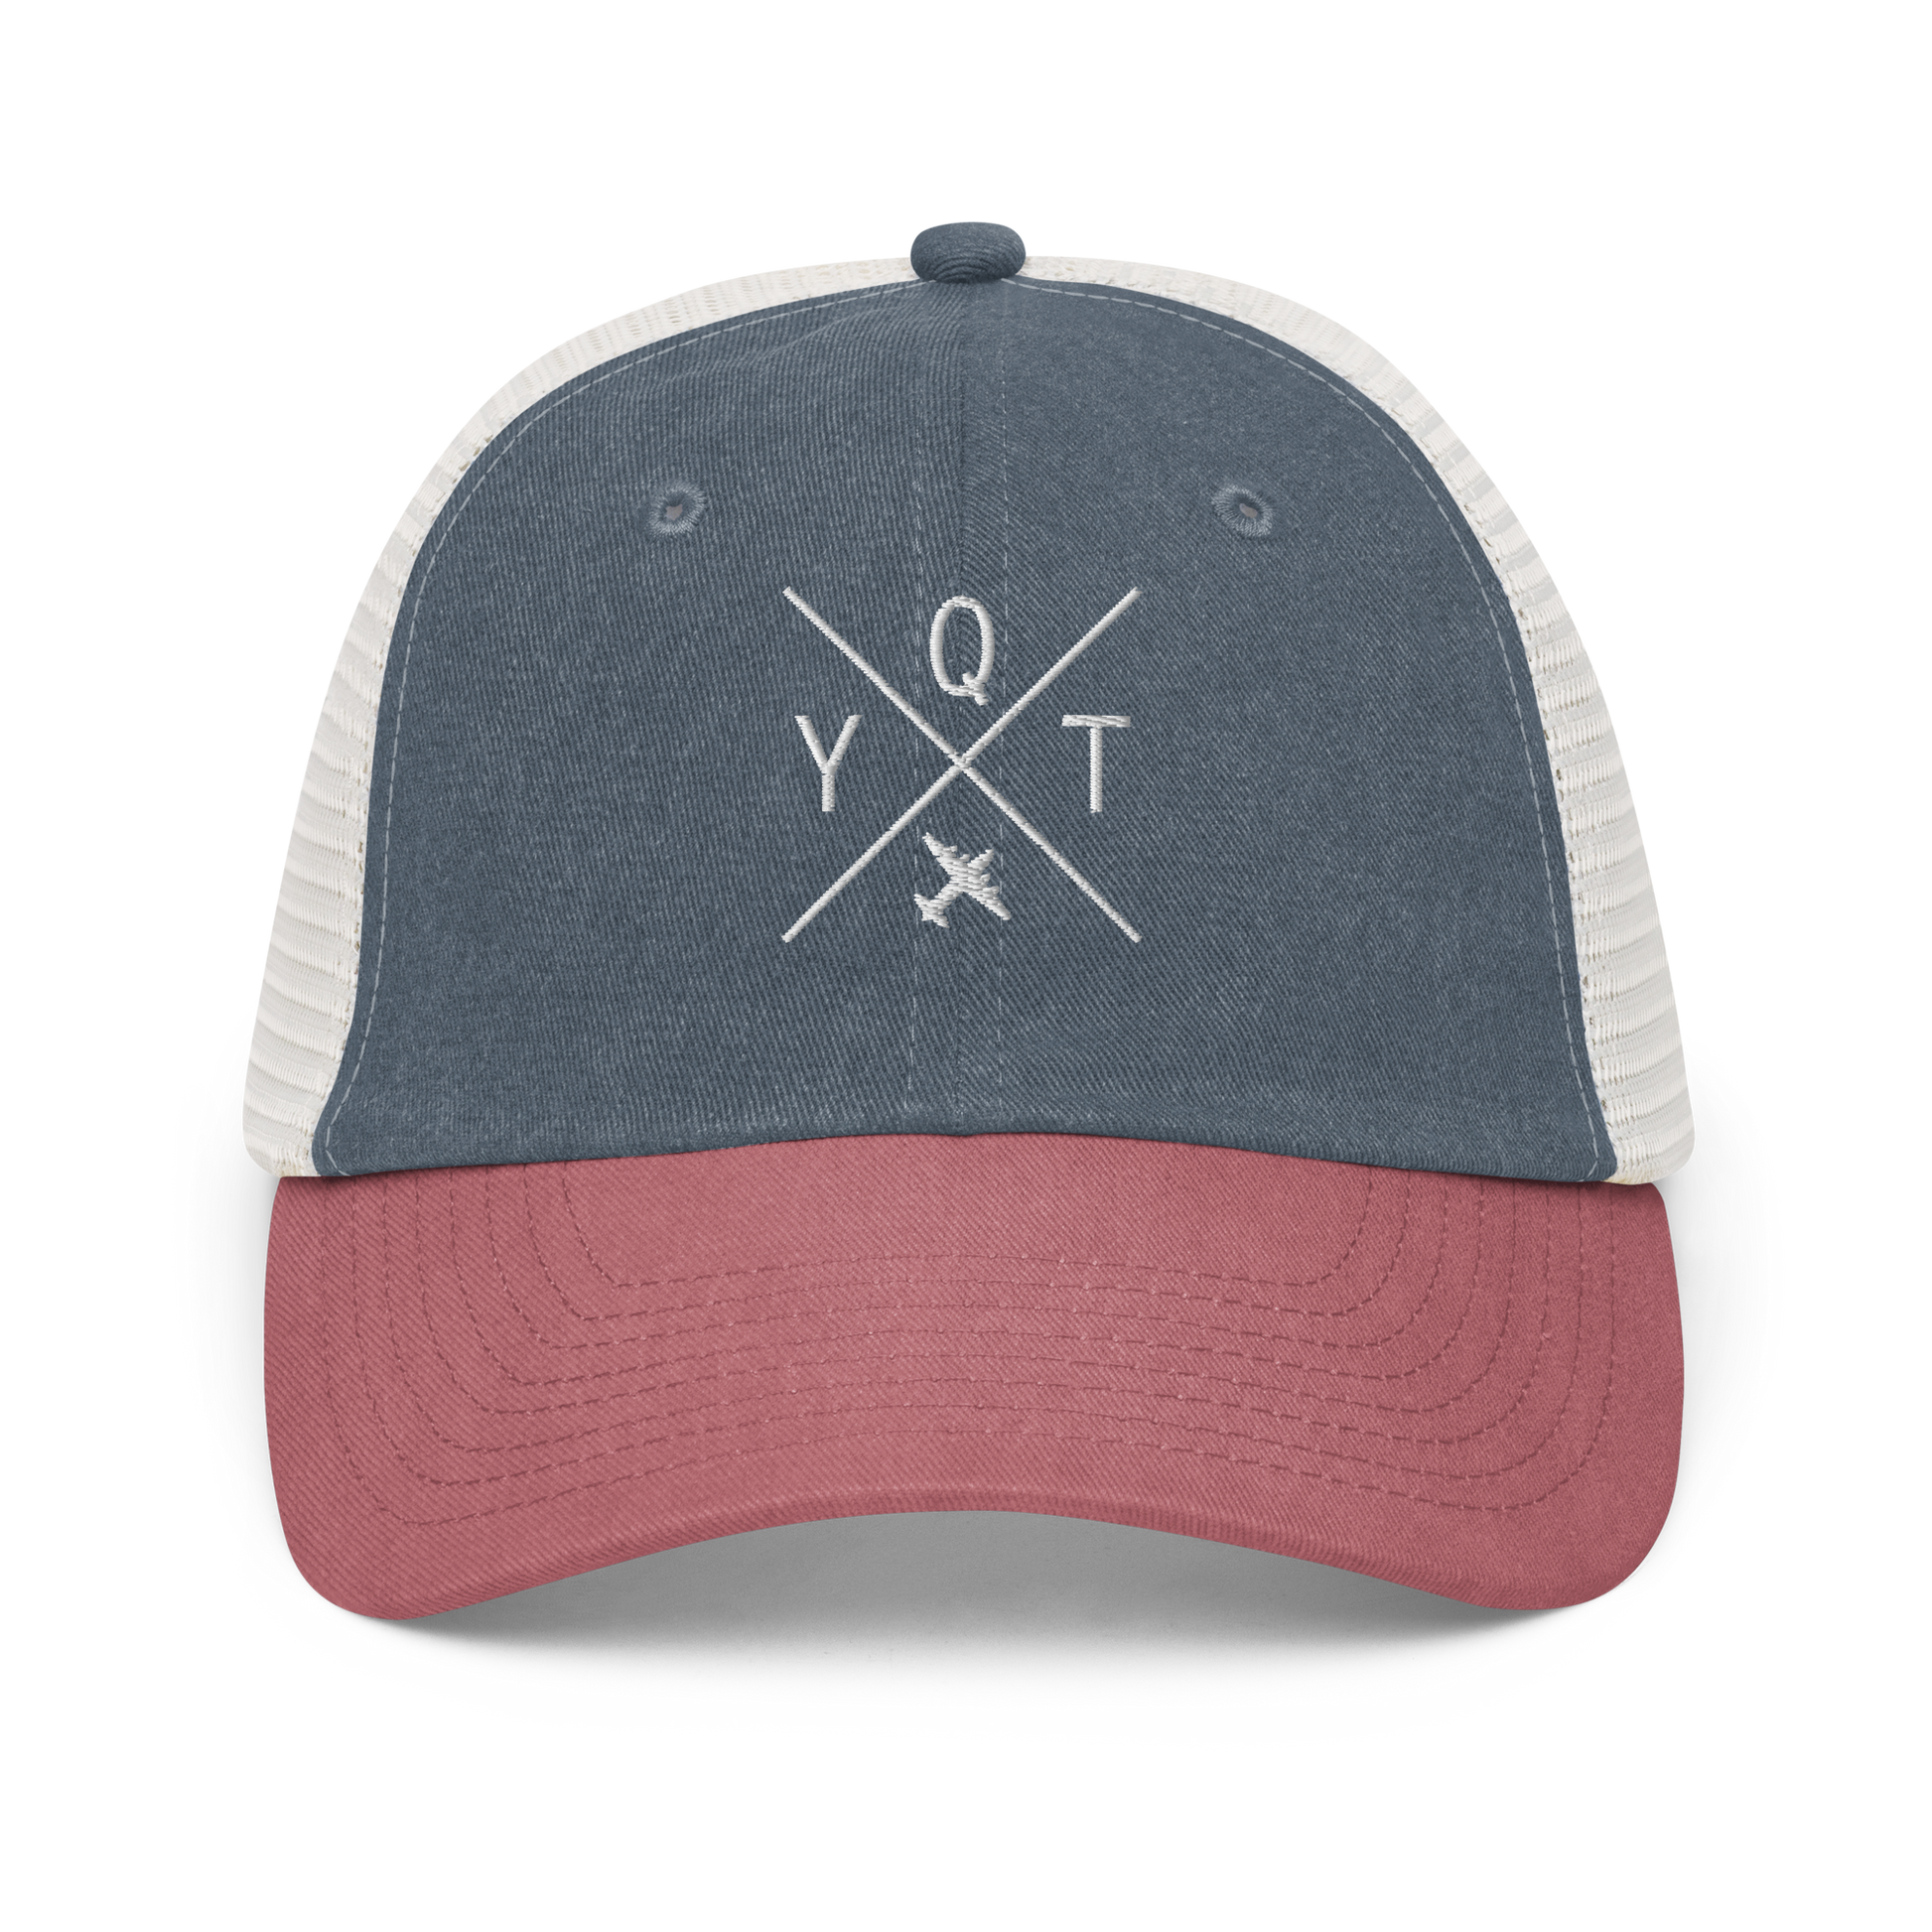 YHM Designs - YQT Thunder Bay Pigment-Dyed Trucker Cap - Crossed-X Design with Airport Code and Vintage Propliner - White Embroidery - Image 12